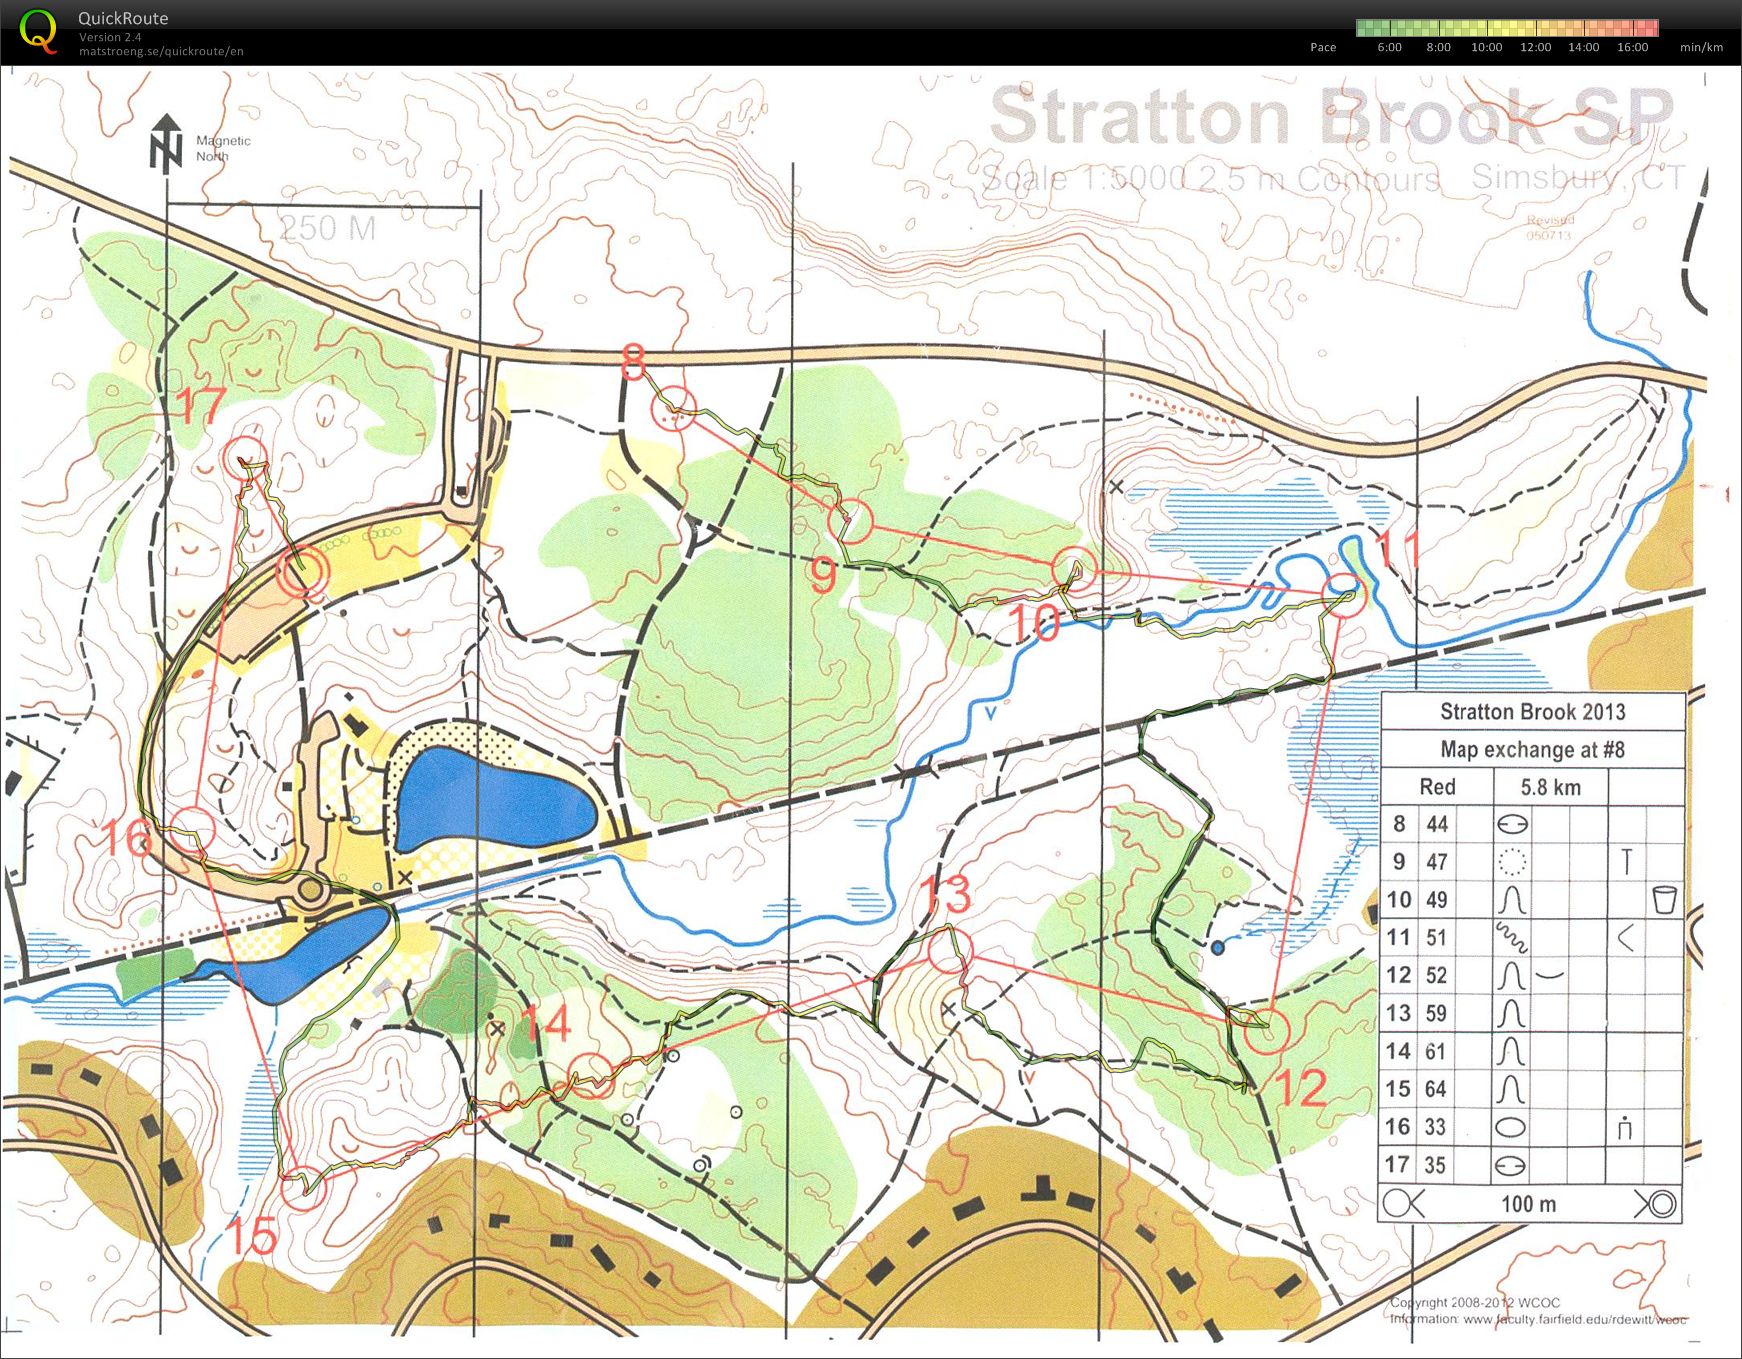 Stratton Brook Red Course, Part 2 (19/05/2013)